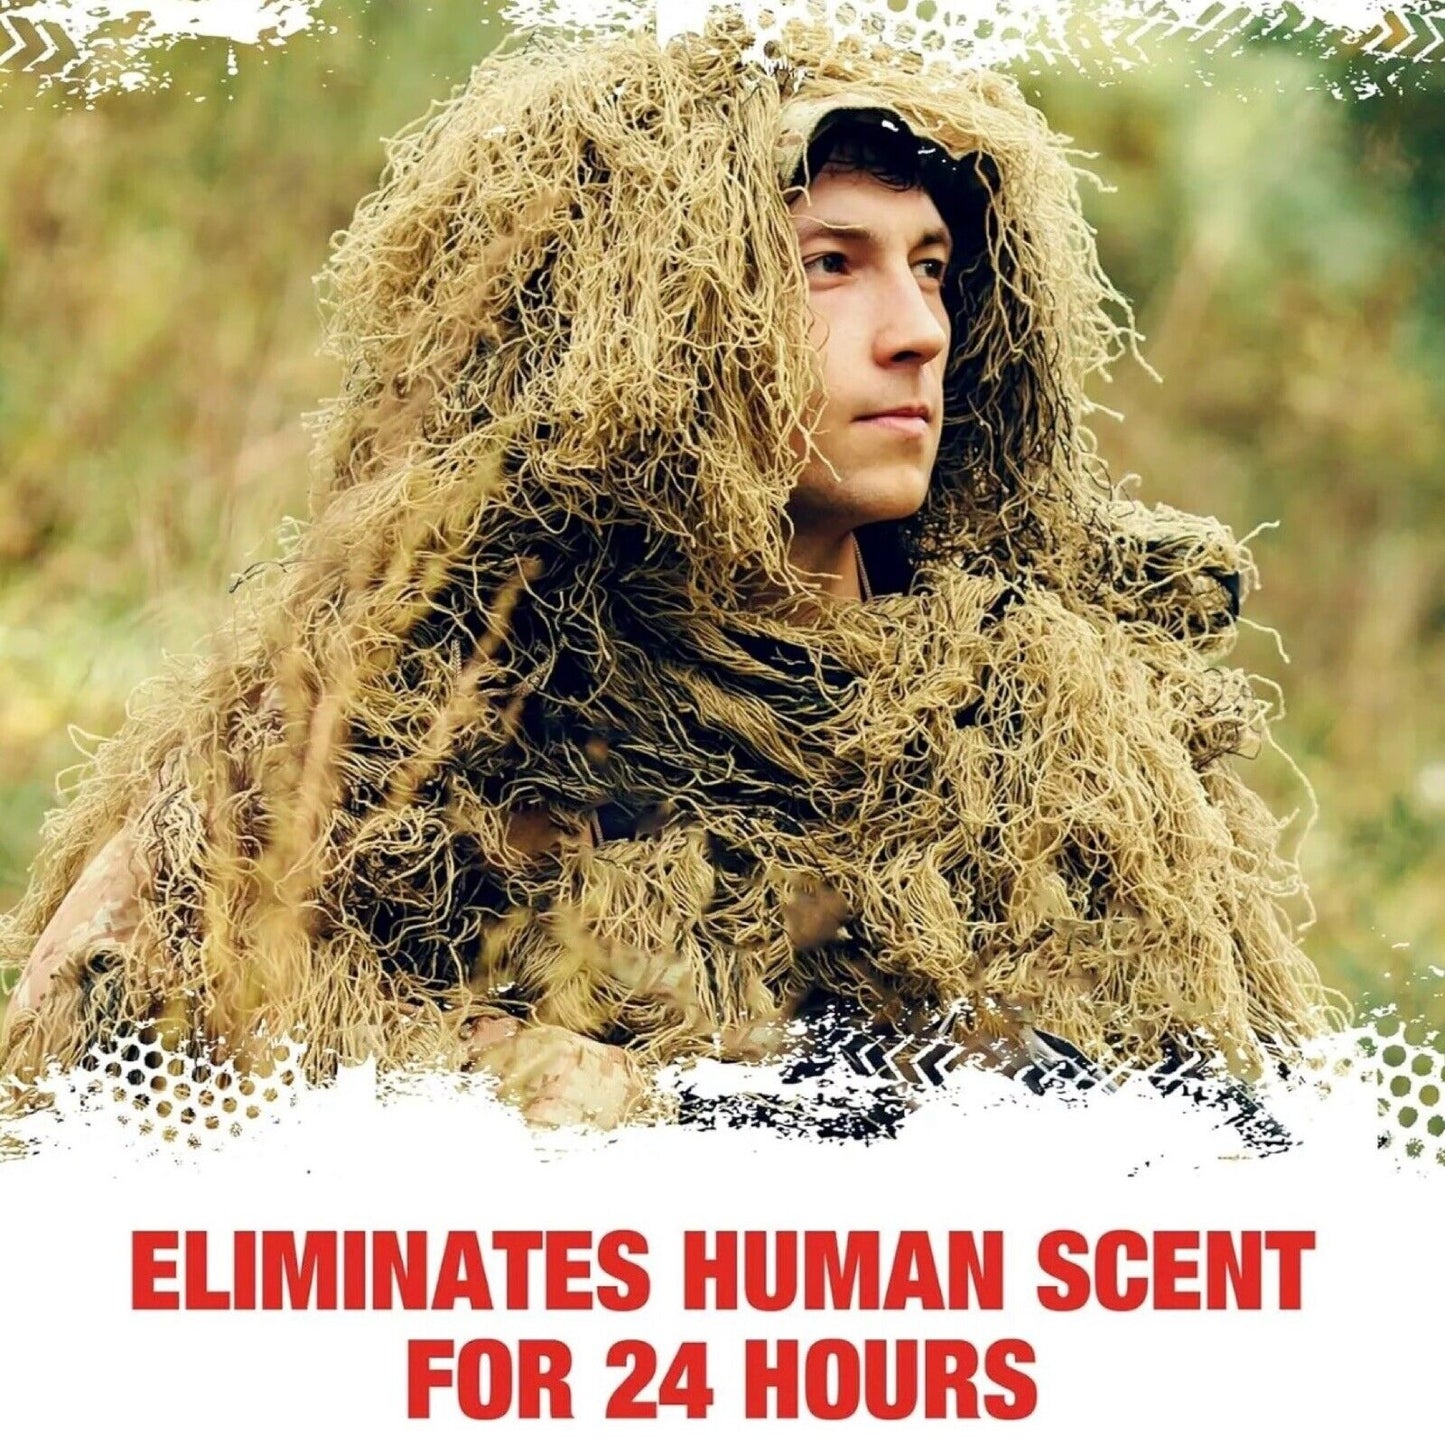 Lethal Hunting Scent Eliminator Deodorant & Prepasted-Field Toothbrush 4 Pack